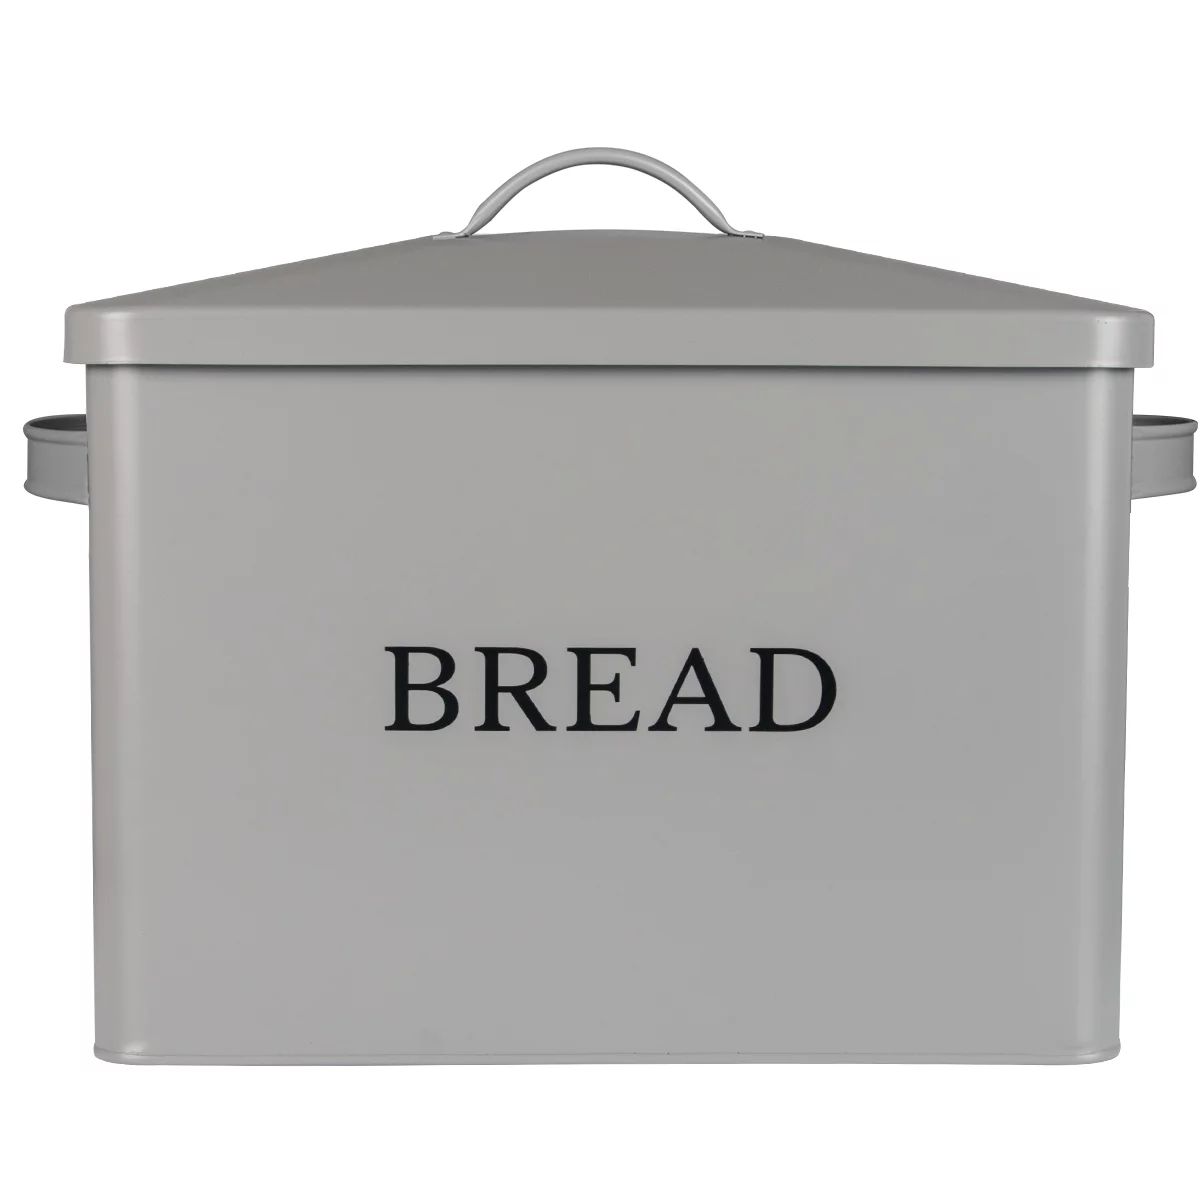 Extra Large Gray Bread box Vertical Vintage Metal Bread Bin With Lid - Holds 2 Loaves - Counterto... | Walmart (US)